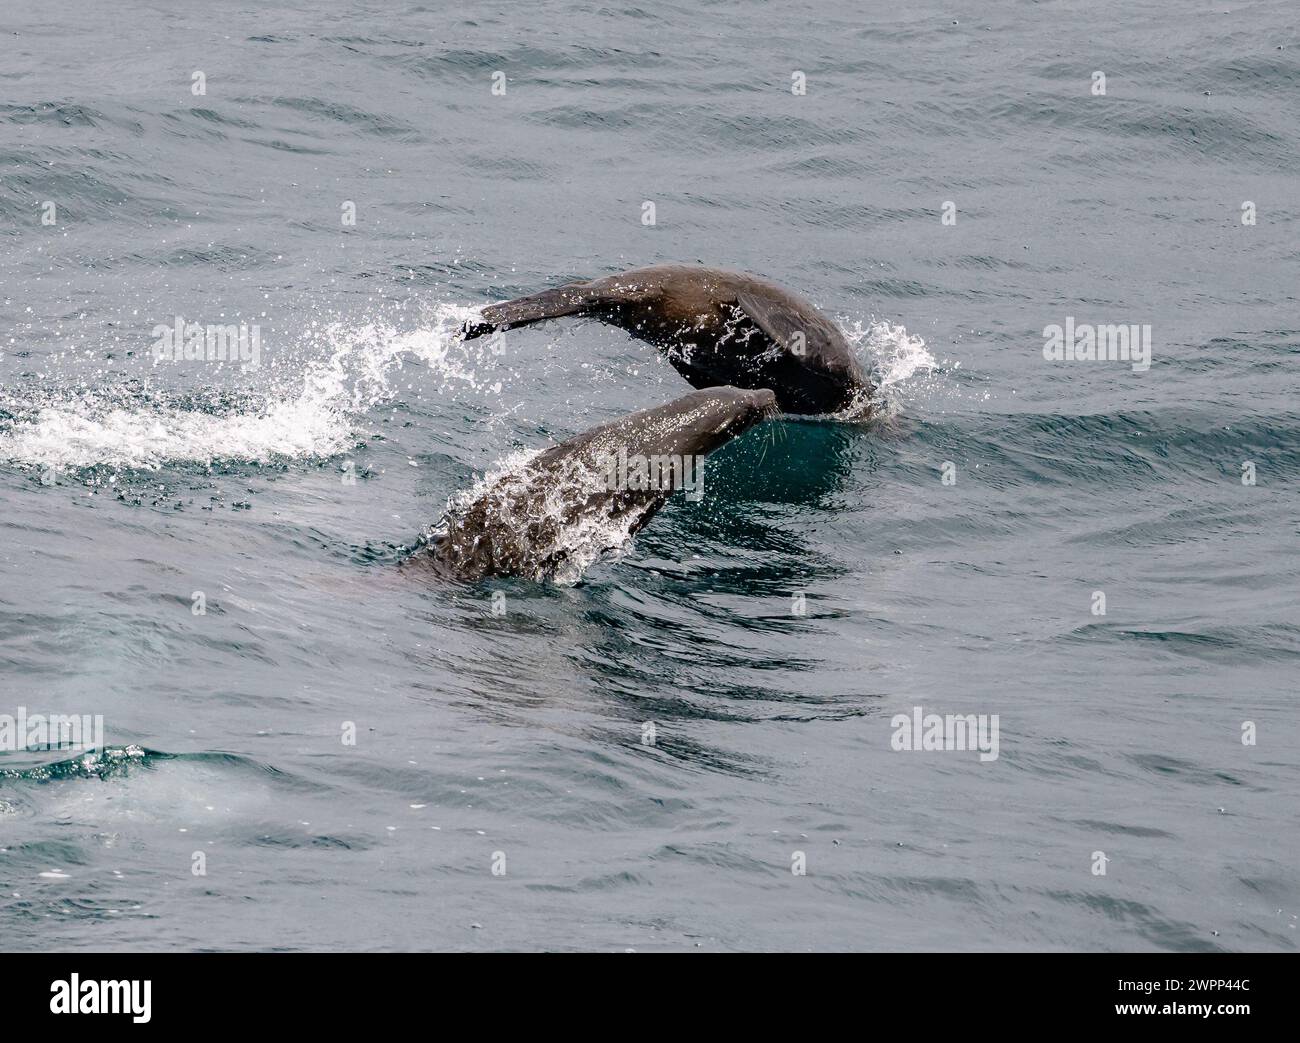 Two South American Fur Seals (Arctocephalus australis) jumping above water. Pacific Ocean, off the coast of Chile. Stock Photo